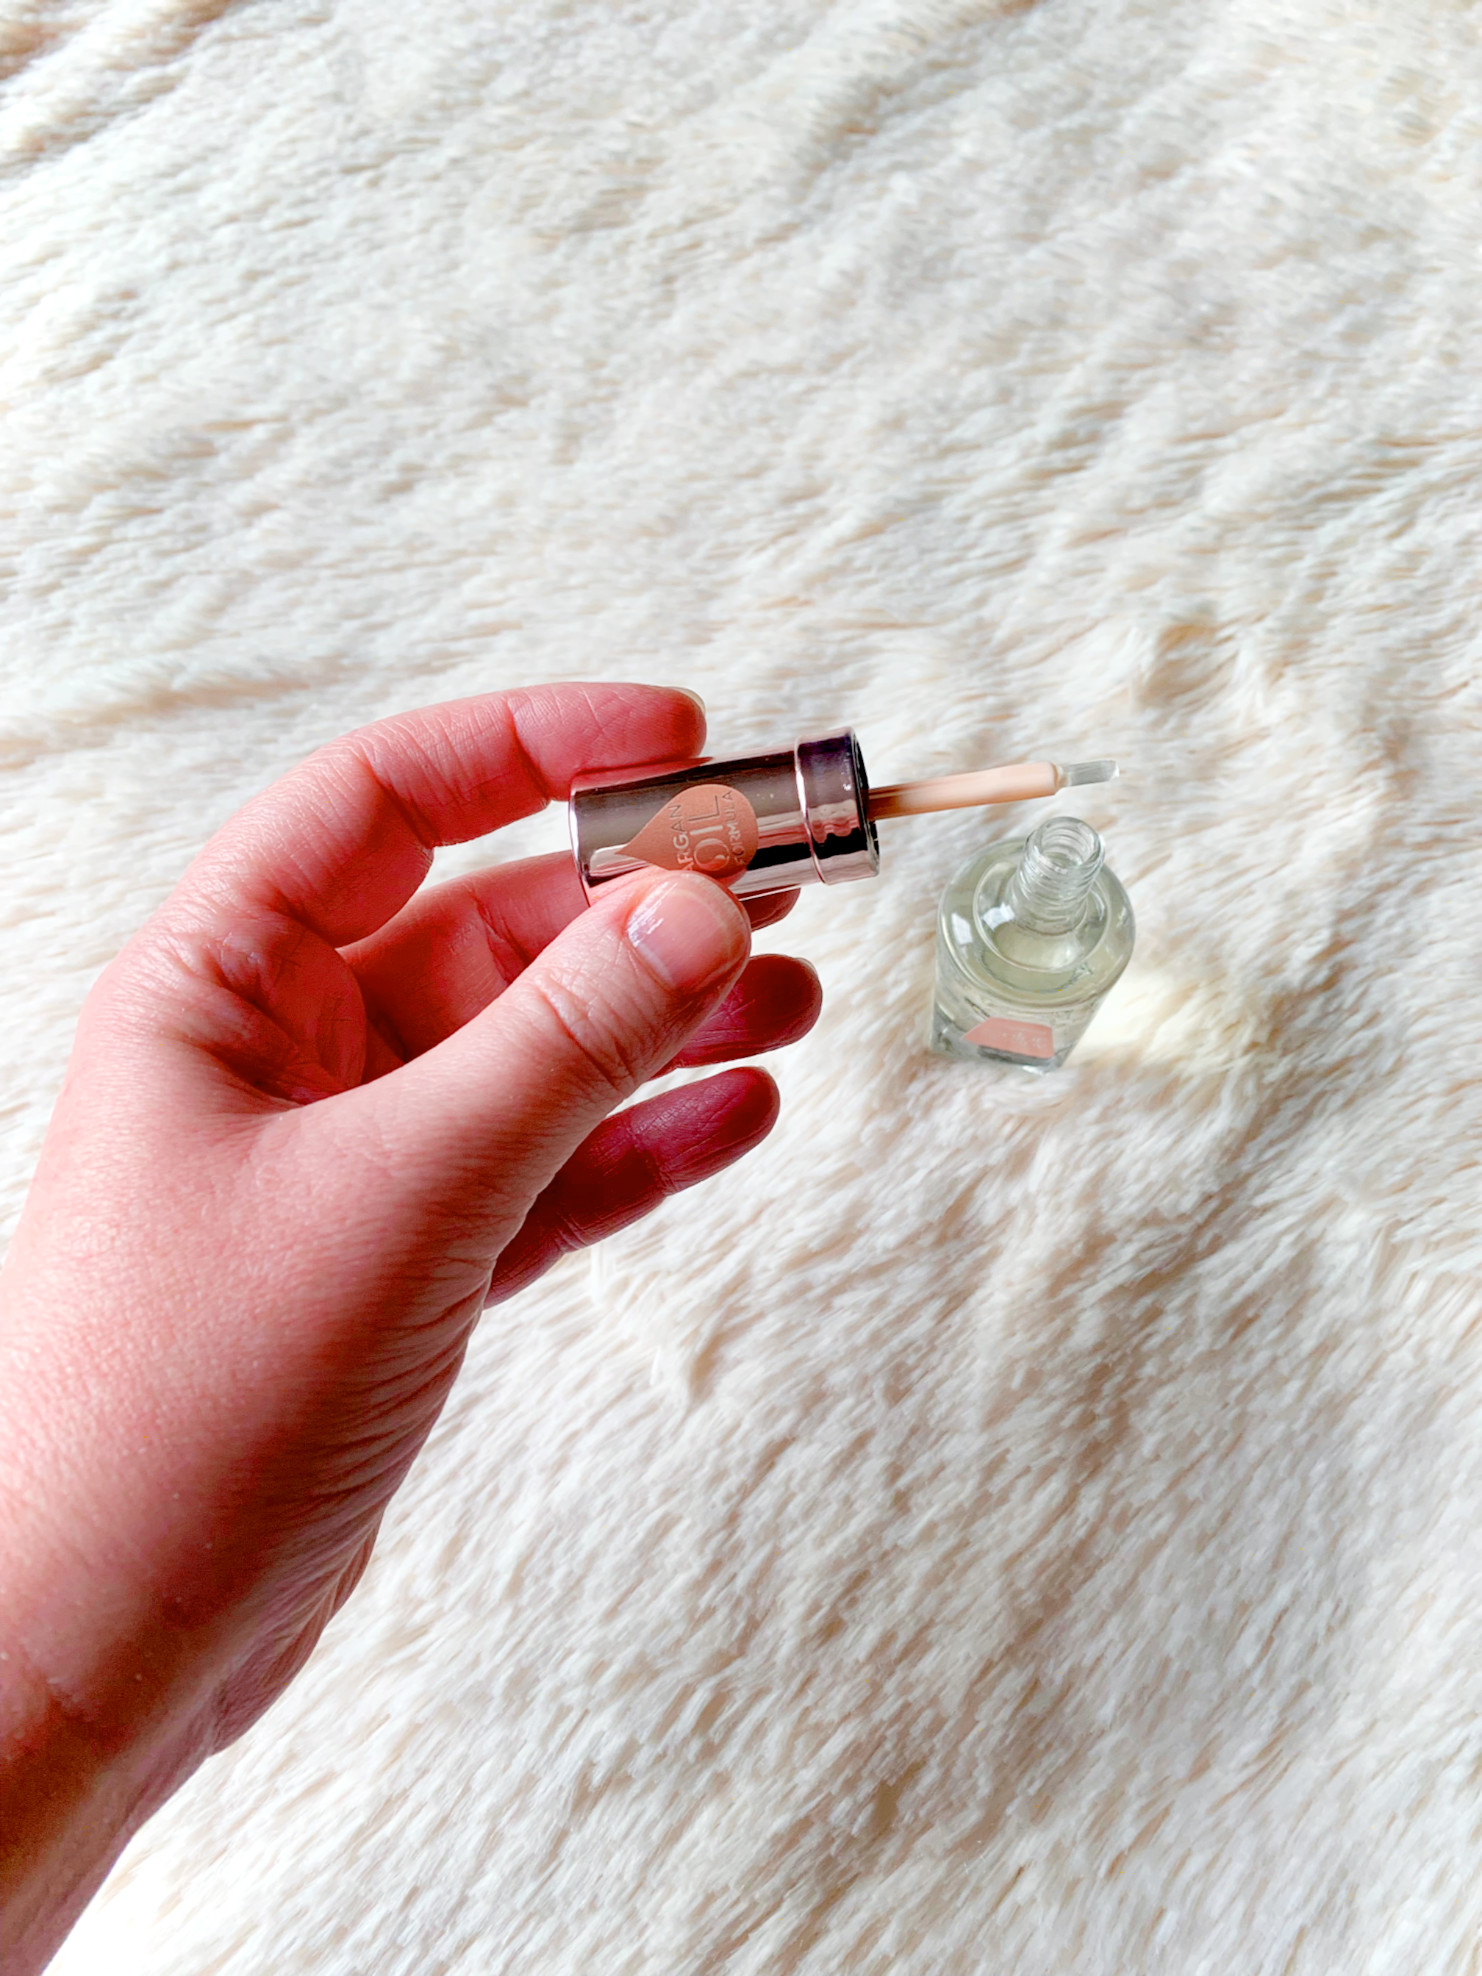 Nail & Cuticle Oil Review - Dressed in Faith